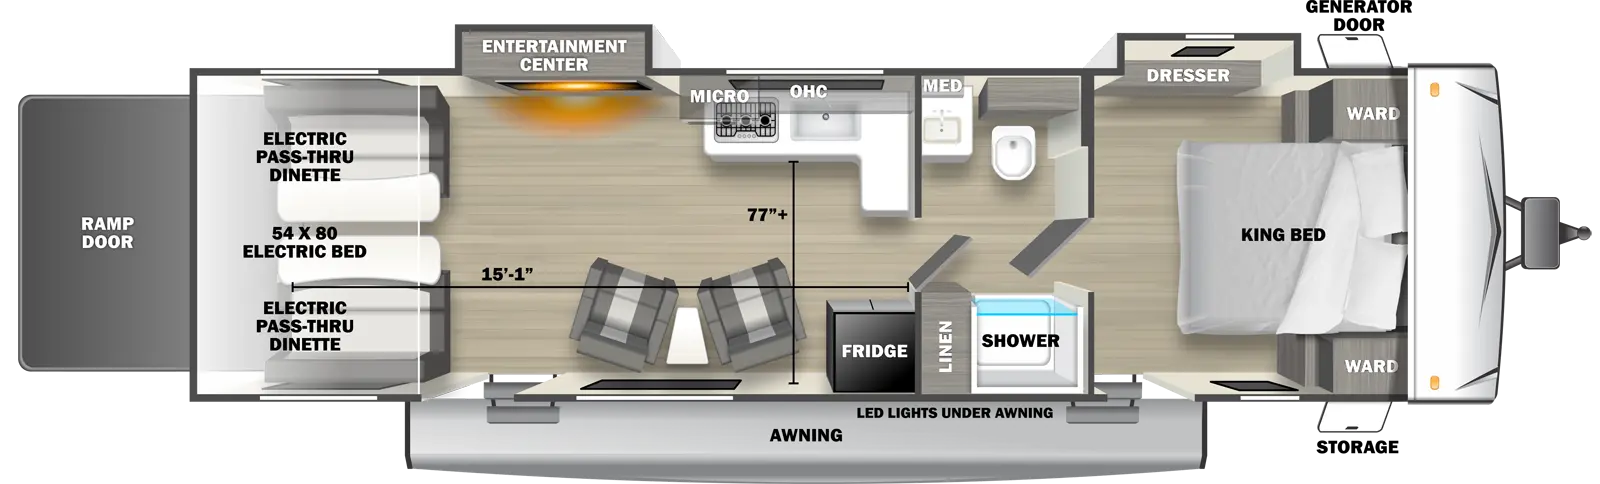 The 2600RLT travel trailer has 2 slide outs on the off-door side, 2 entry doors and 1 rear ramp door. Exterior features include an awning with LED lights over both entry doors, front door side storage and front off-door side generator door. Interior layout from front to back includes: front bedroom with foot-facing King bed, shelf over the bed, front corner wardrobes, off-door side slideout holding a dresser and door side entry door to outside; pass-through bathroom with toilet, medicine cabinet and sink on the off-door side and shower and linen storage on the door side; off-door side L-shaped kitchen countertop with overhead microwave and cabinets, stovetop and sink; door side refrigerator; 2 door side recliners with end table; off-door side slideout holding an entertainment center; door side entry door to outside; and rear 54 x 80 electric bed over electric pass-through dinette. Cargo length from rear of unit to kitchen wall is 15 ft. 1 in. Cargo width from kitchen countertop to door side wall is 77 inches.